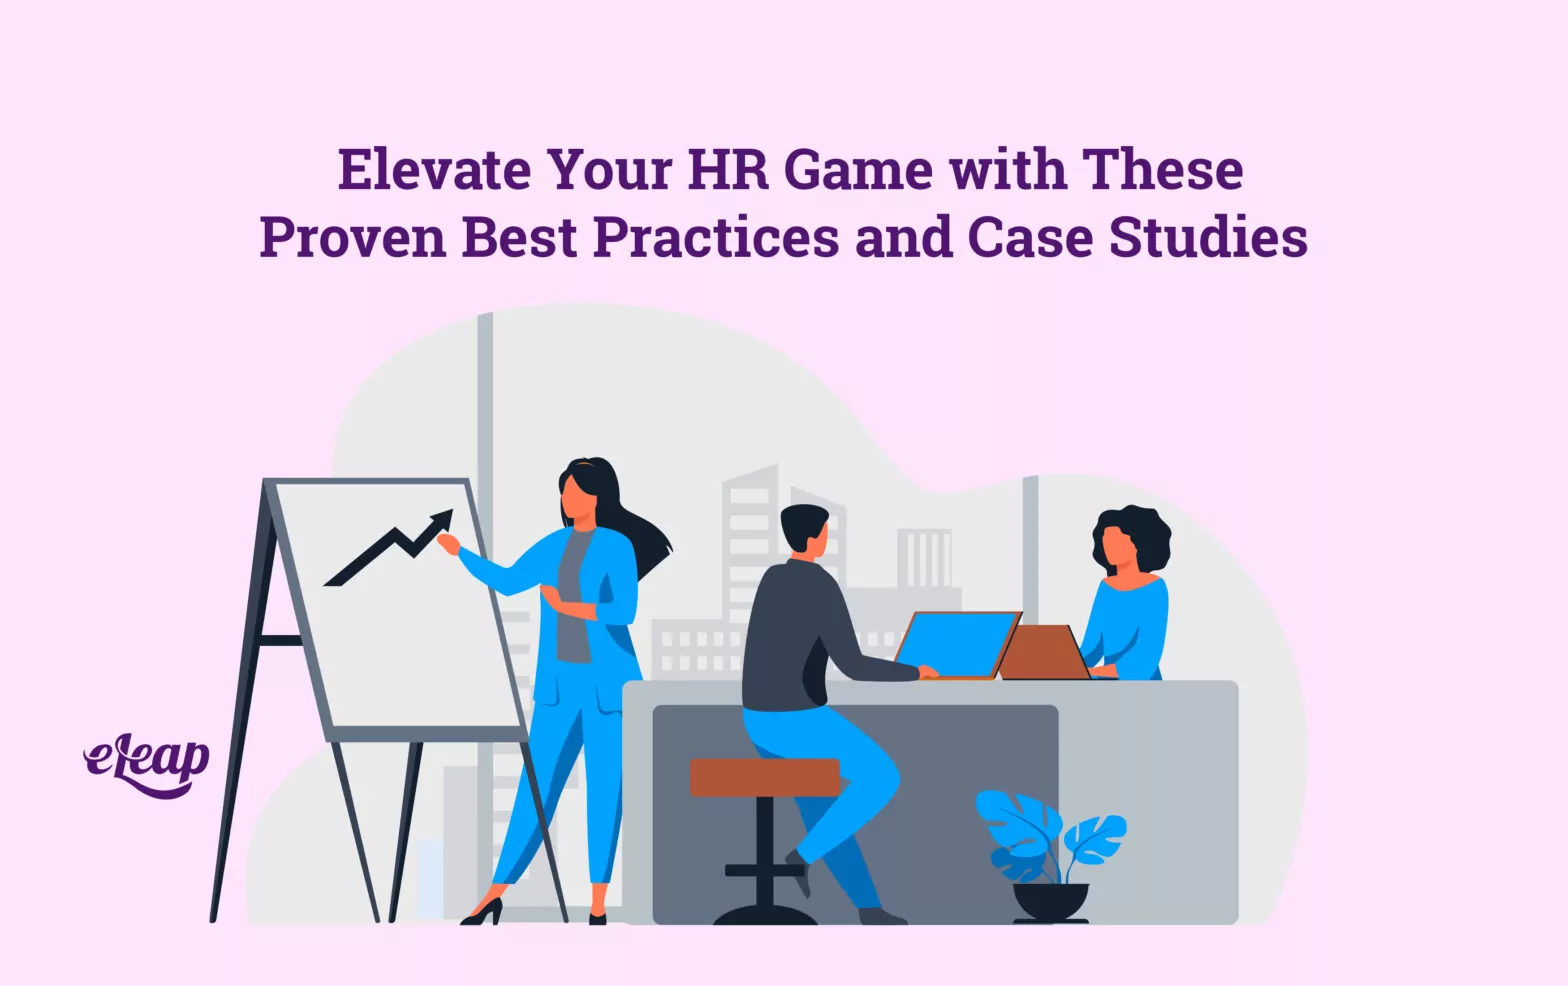 Elevate Your HR Game with These Proven Best Practices and Case Studies